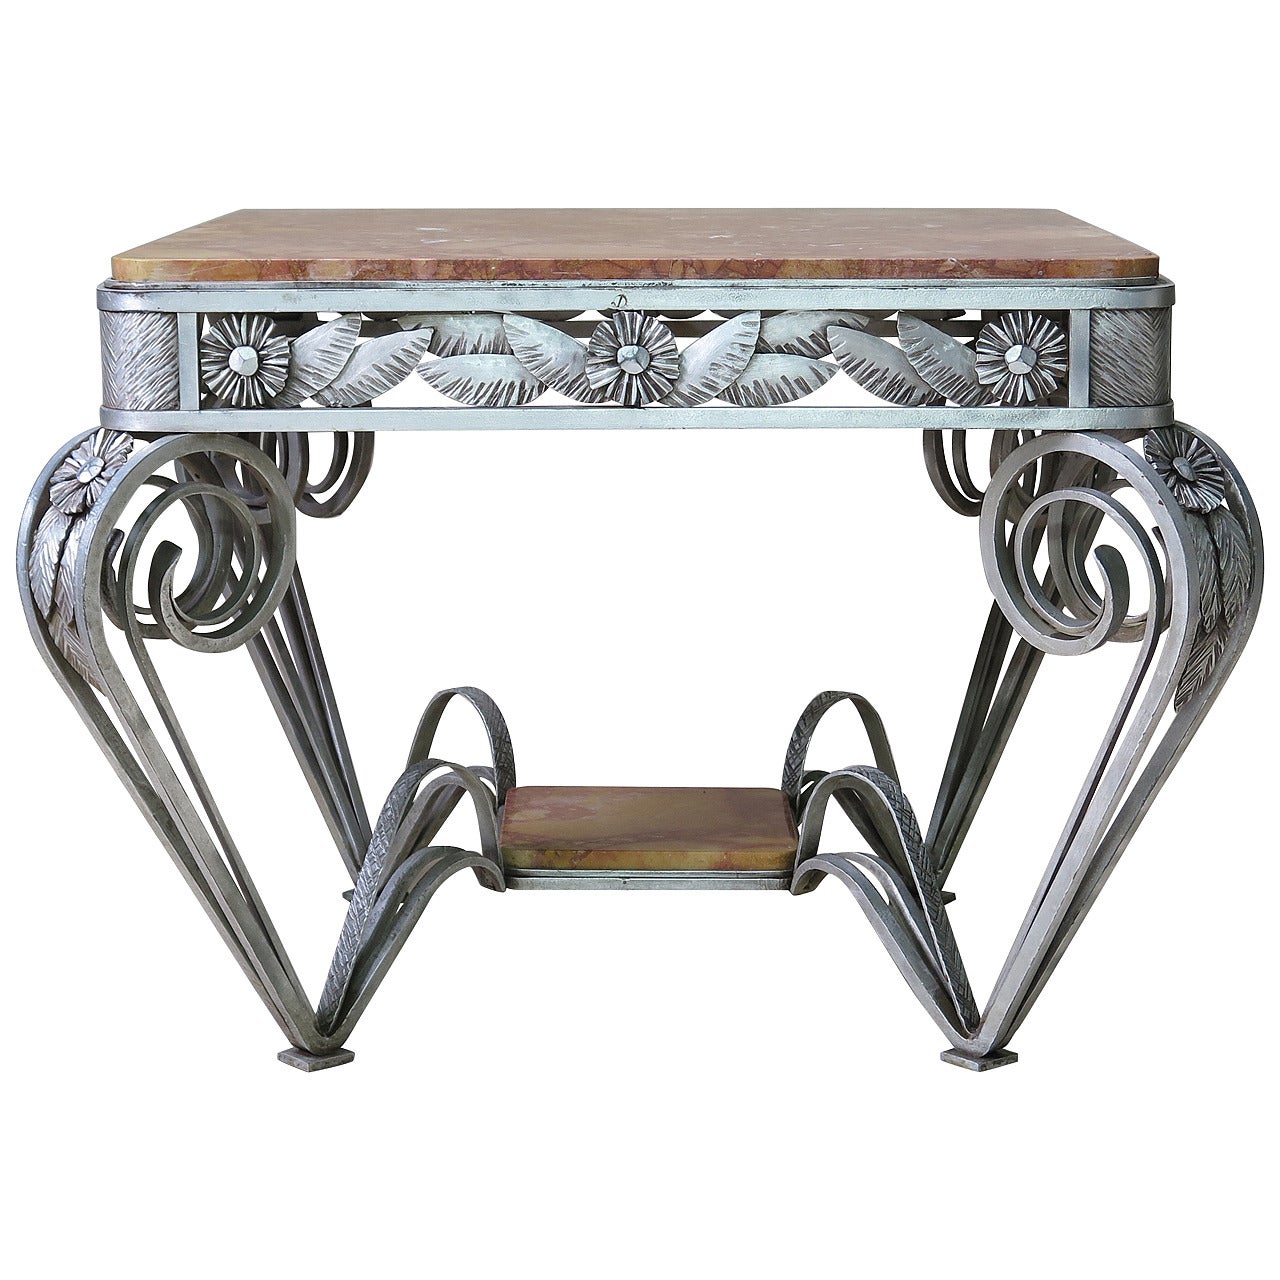 French Art Deco Wrought Iron and Marble "Flower" Table, circa 1930s